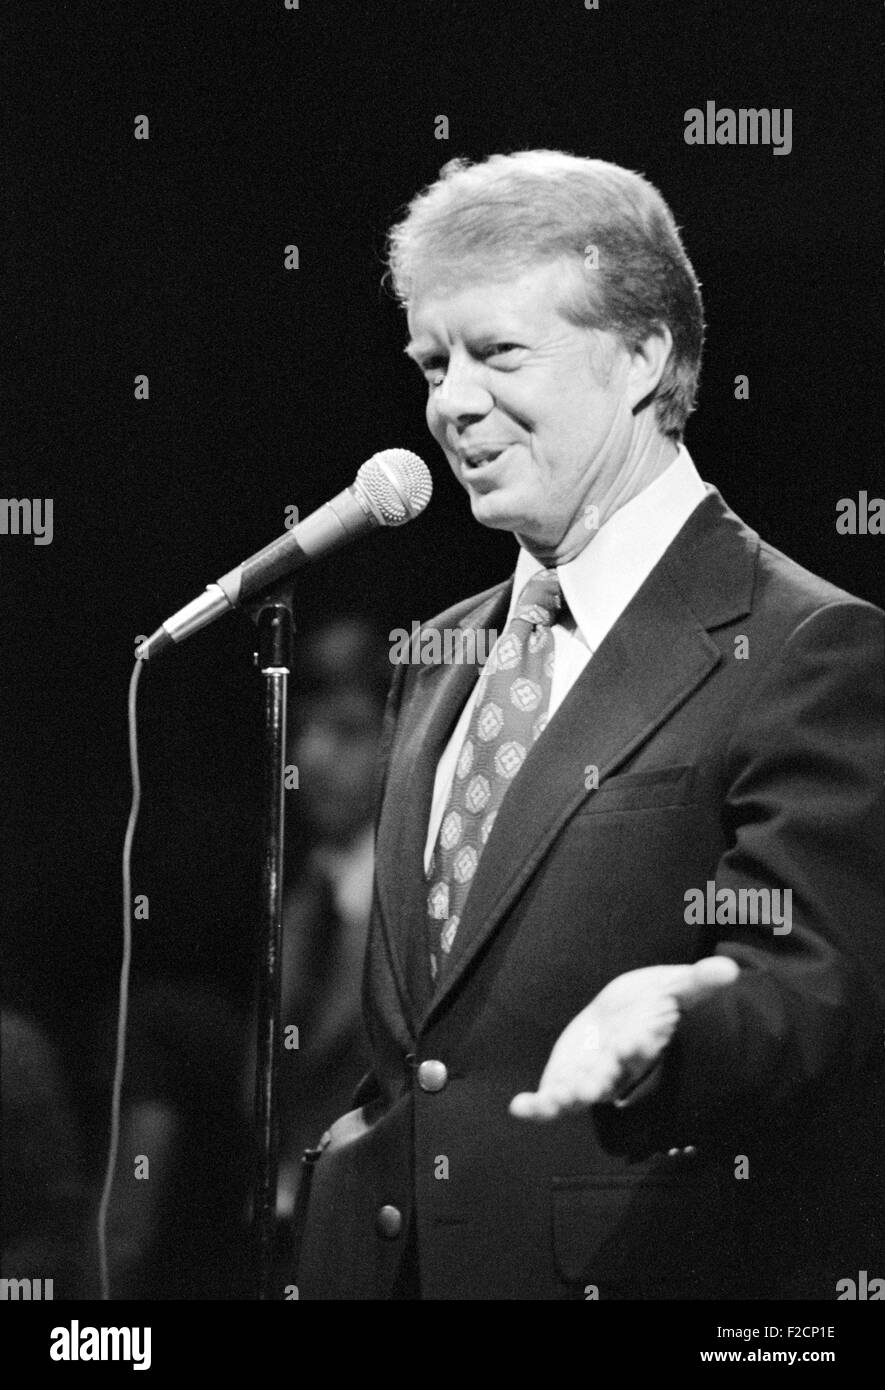 Former Georgia Gov and Democratic presidential candidate Jimmy Carter speaks at Brooklyn College September 7, 1976 in Brooklyn, New York. Stock Photo